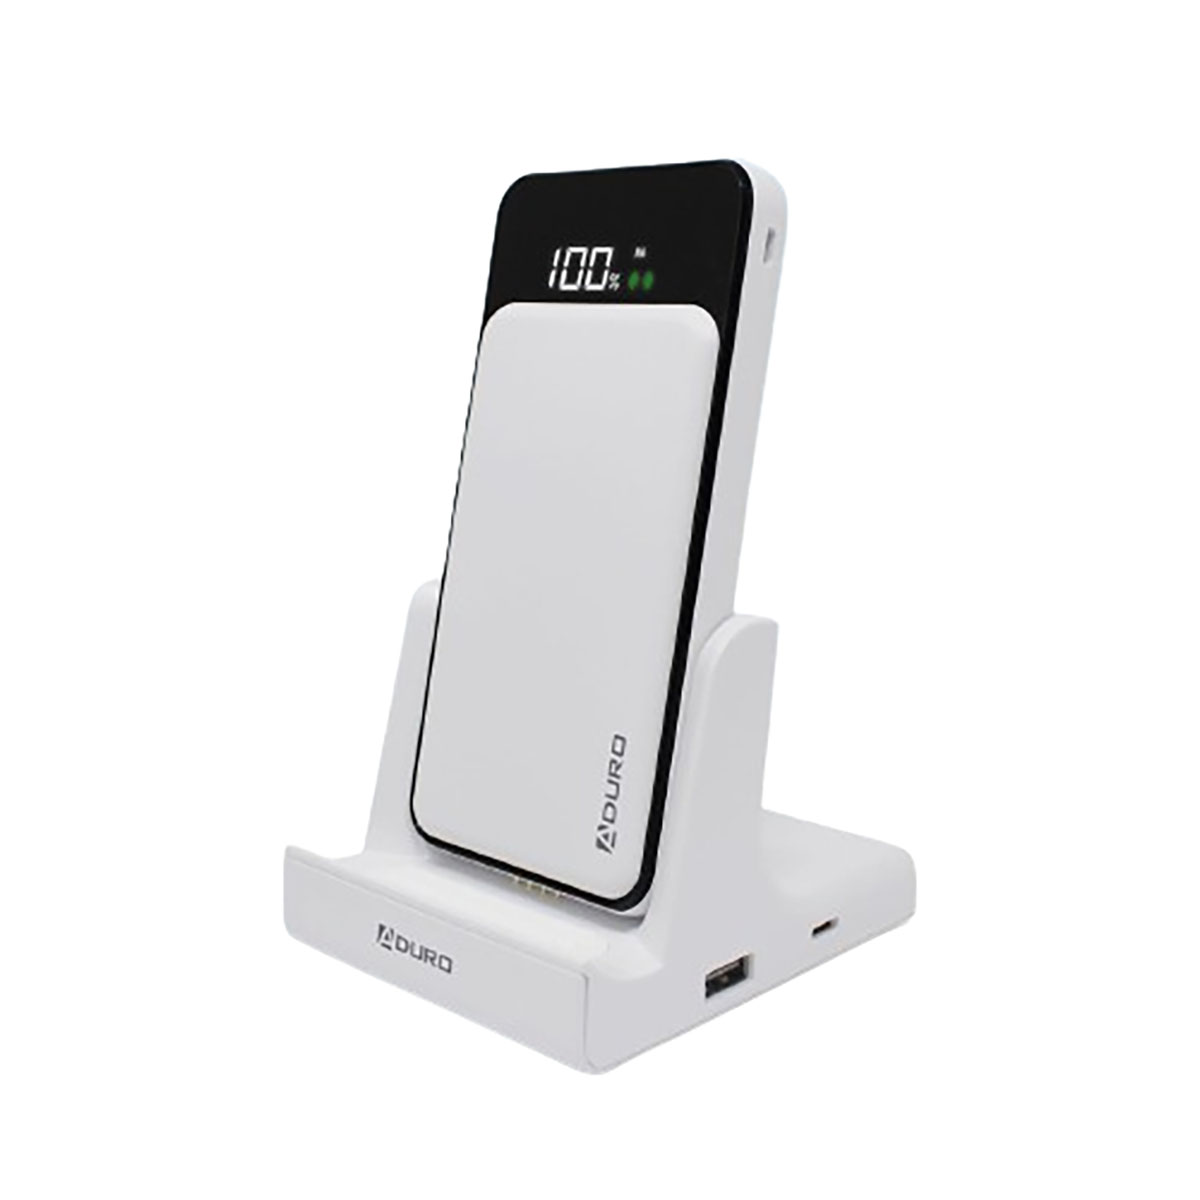 Photos - Charger Aduro PowerUp 2-in-1 Qi Wireless Charging Battery & Desktop Charging Stati